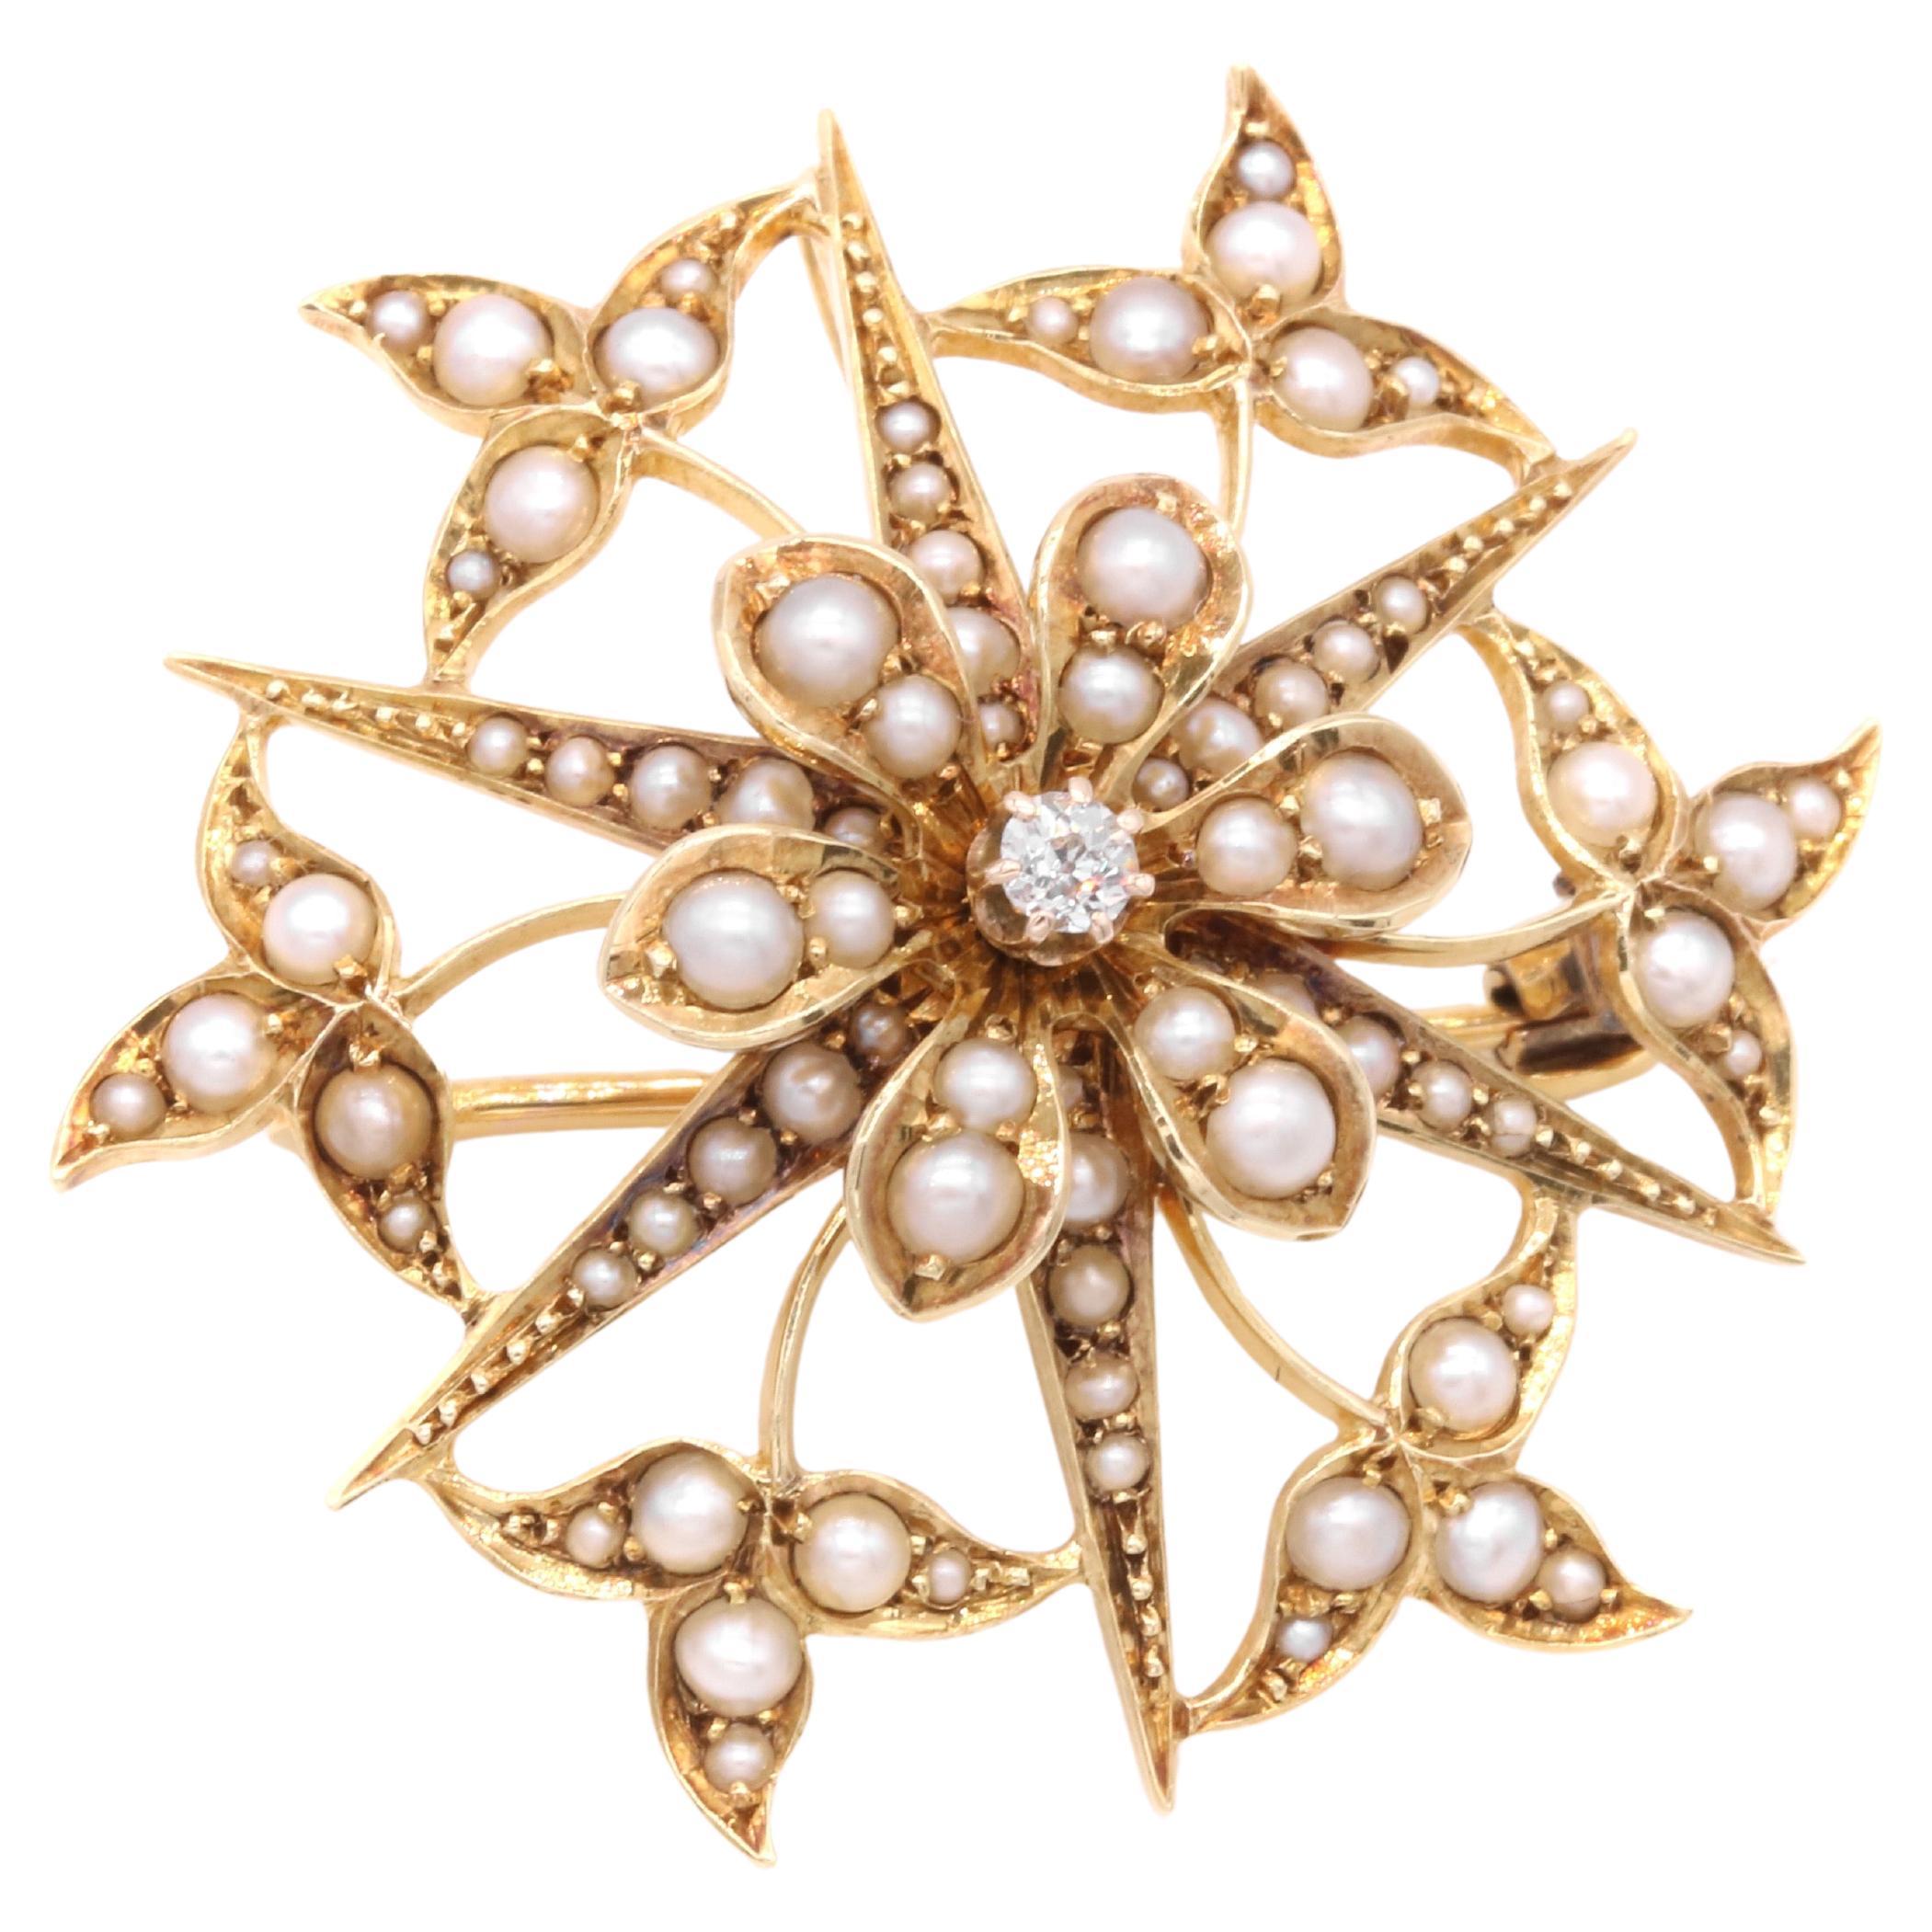 Antique Edwardian 15K Gold Pearl and Diamond Floral Star Brooch and Pendant